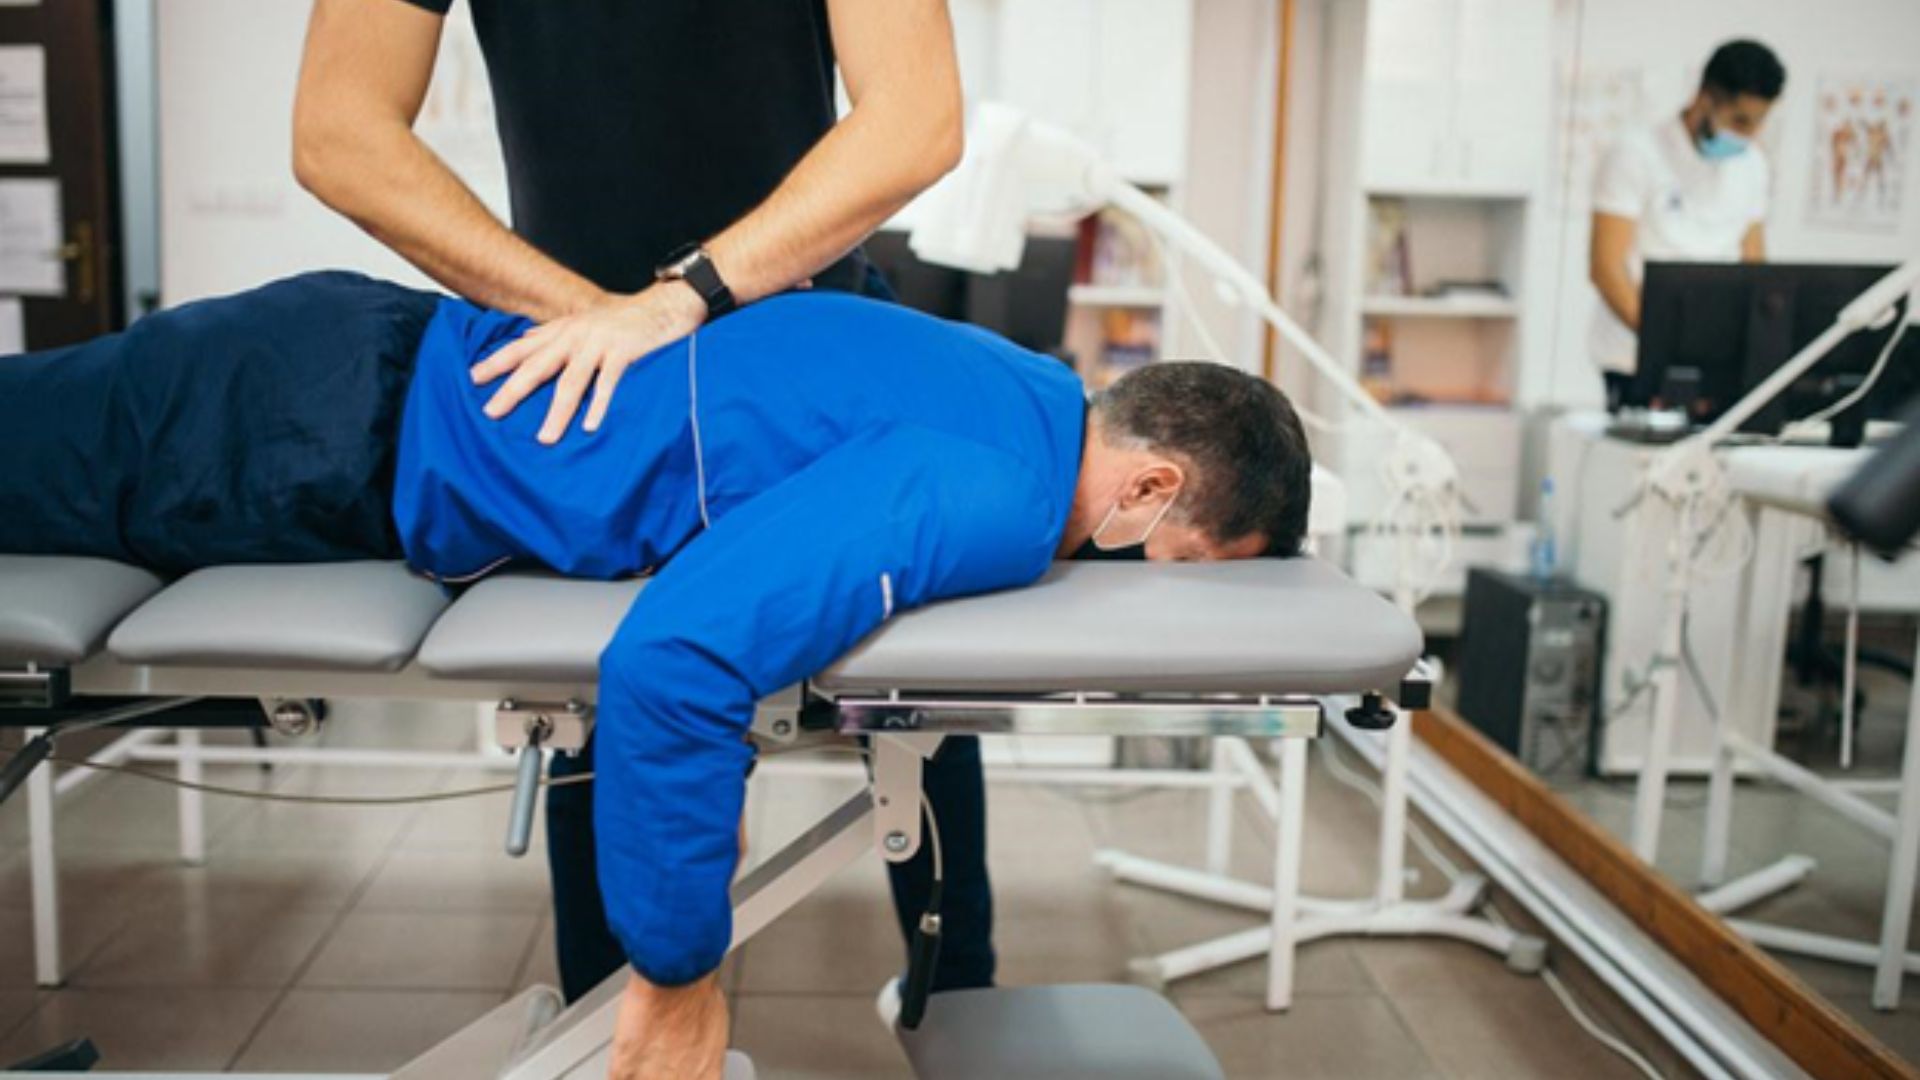 What are the common conditions treated by a chiropractor?